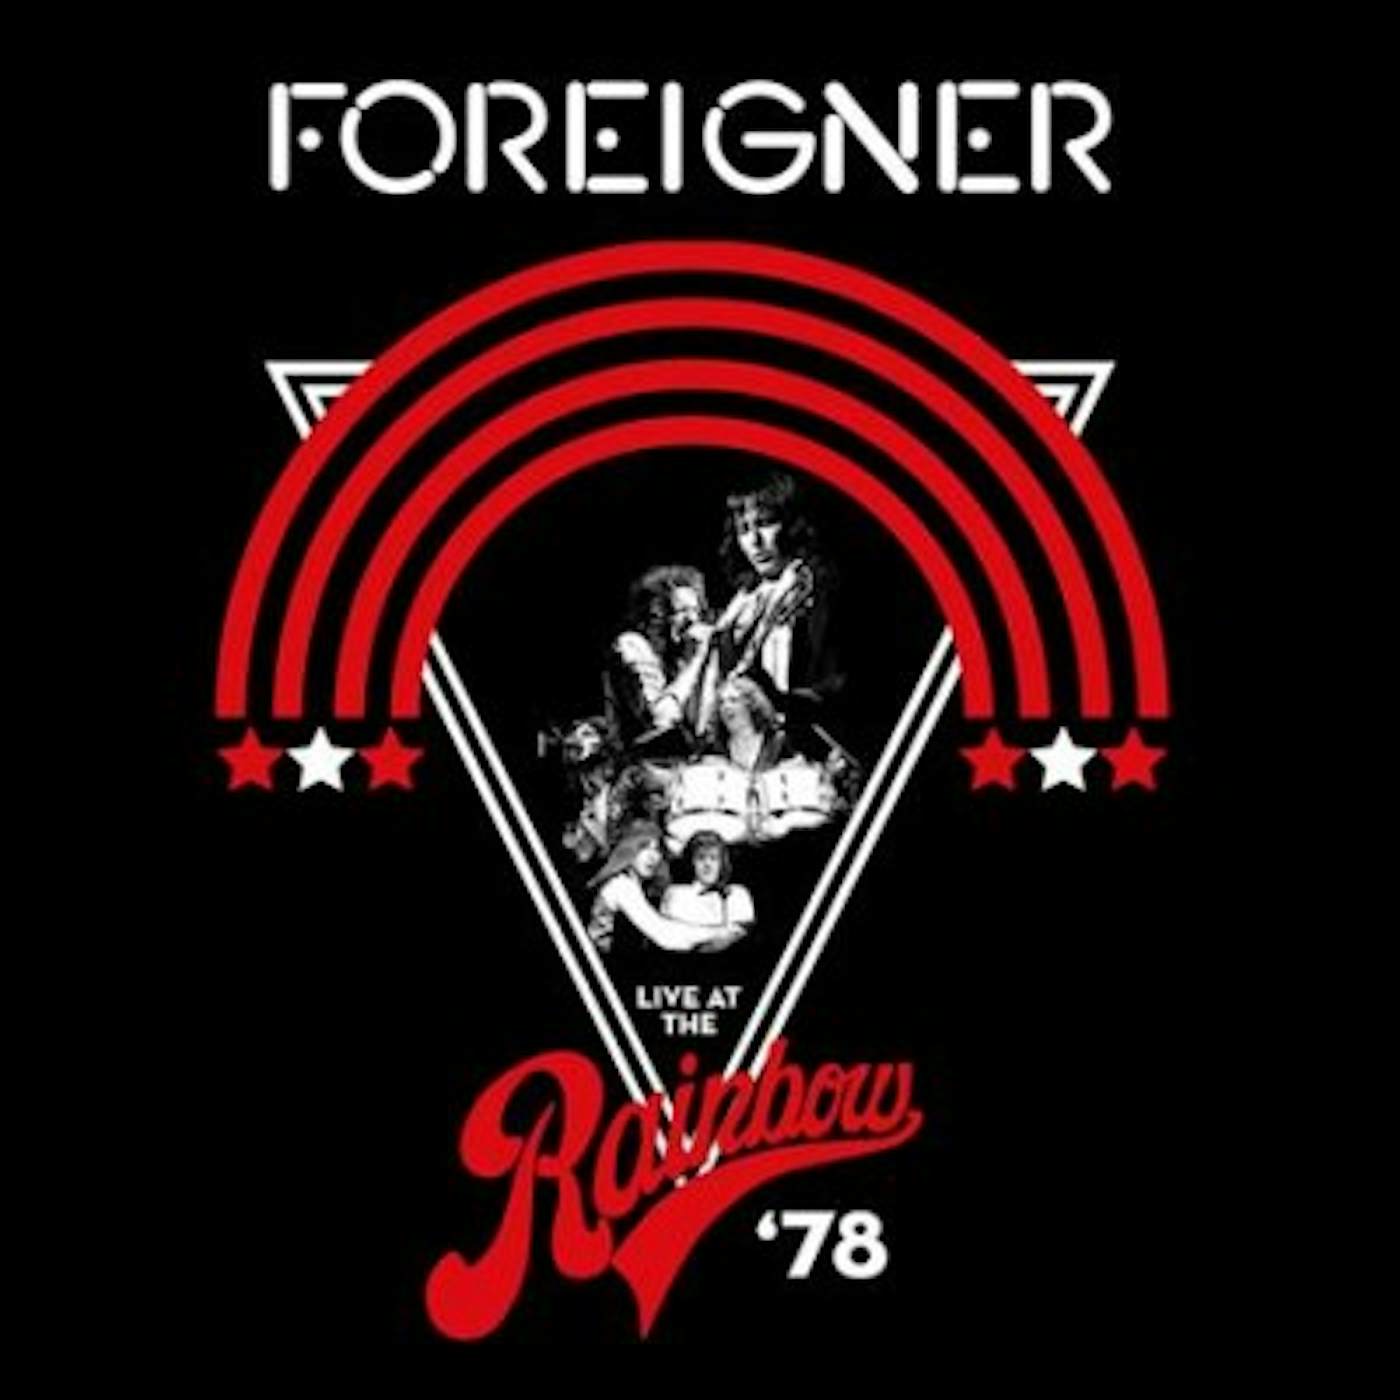 Foreigner LIVE AT THE RAINBOW 78 (2LP) Vinyl Record